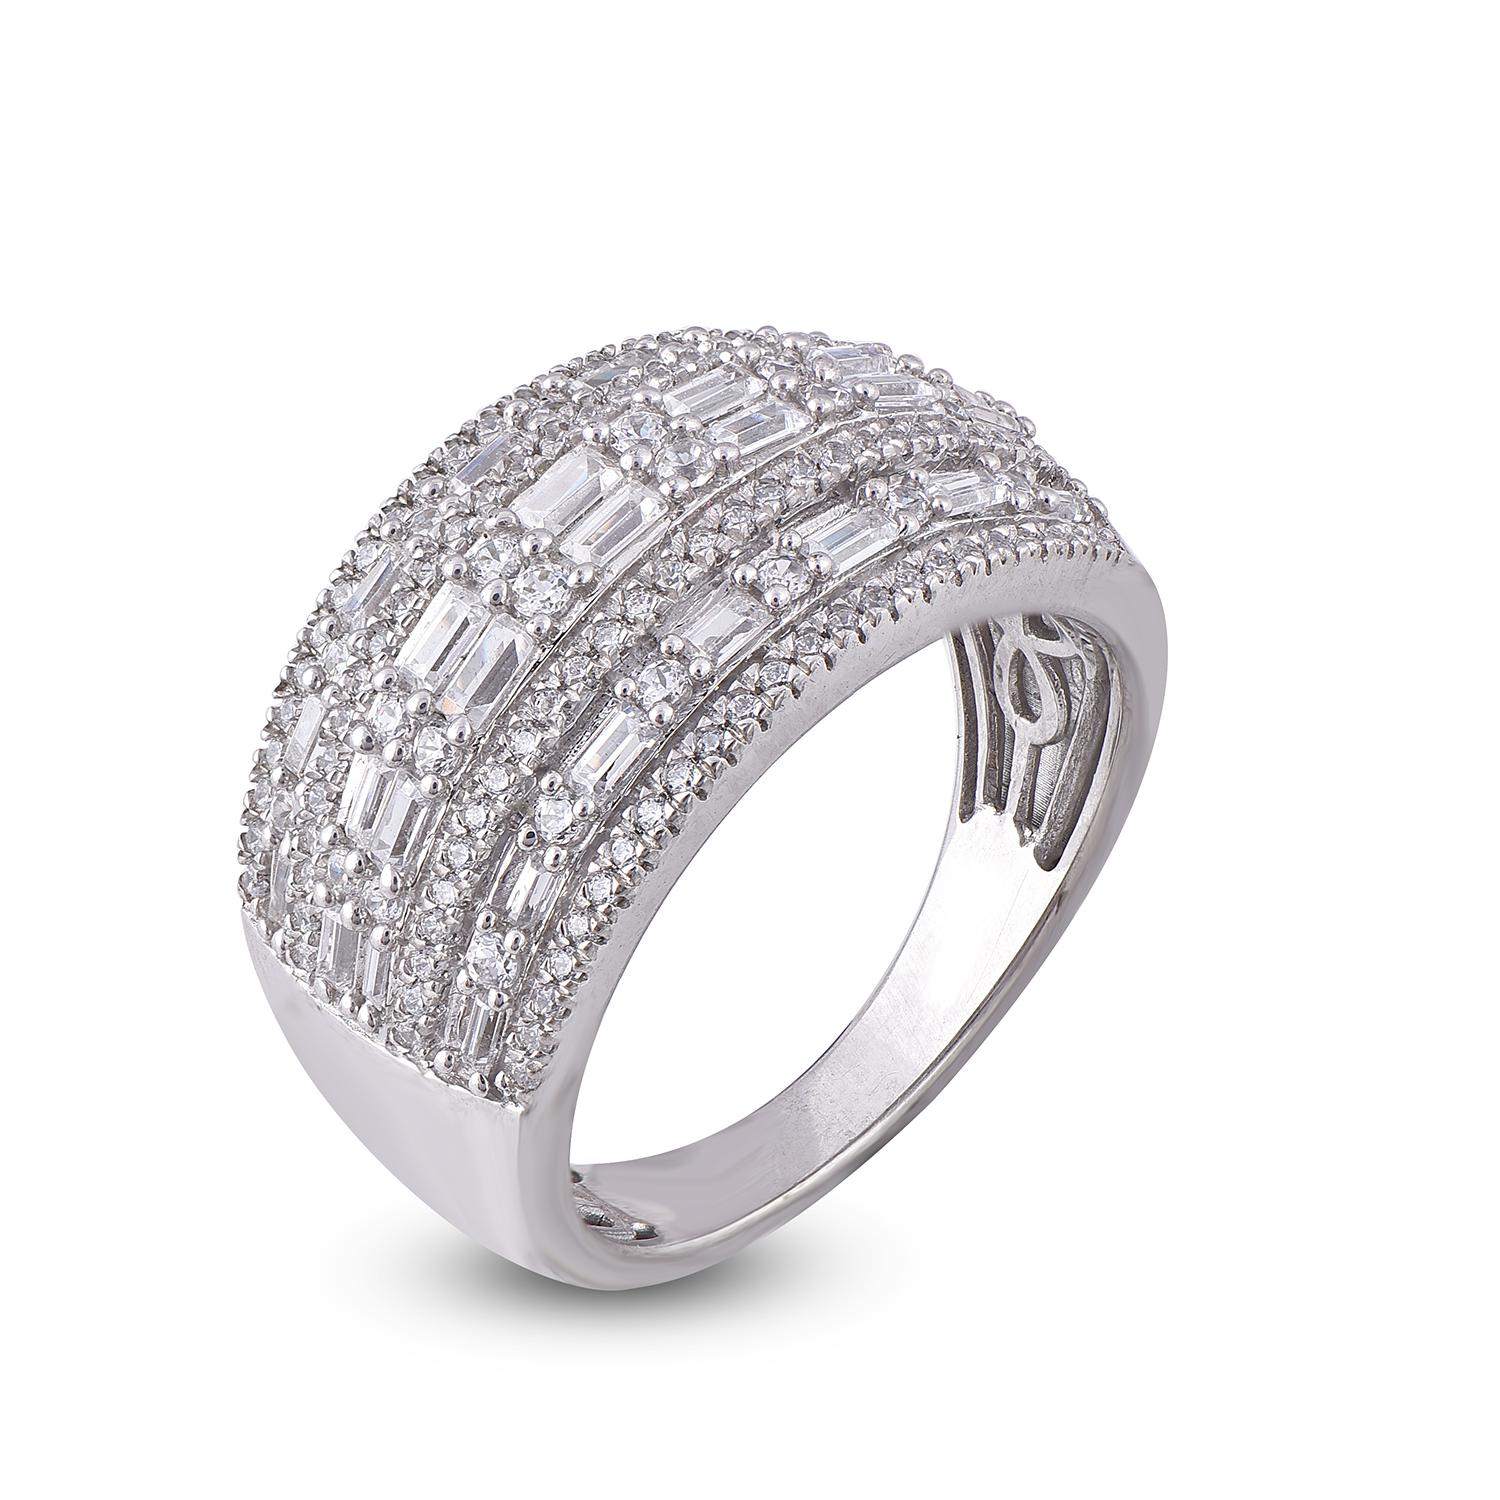 Say it with the timeless allure of gold complementing the beauty of diamond studded with 124 natural diamond and 28 Baguette cut diamond beautifully set in prong and channel setting. Fashioned in 14 karat White gold and 1.00 ct total diamond weight